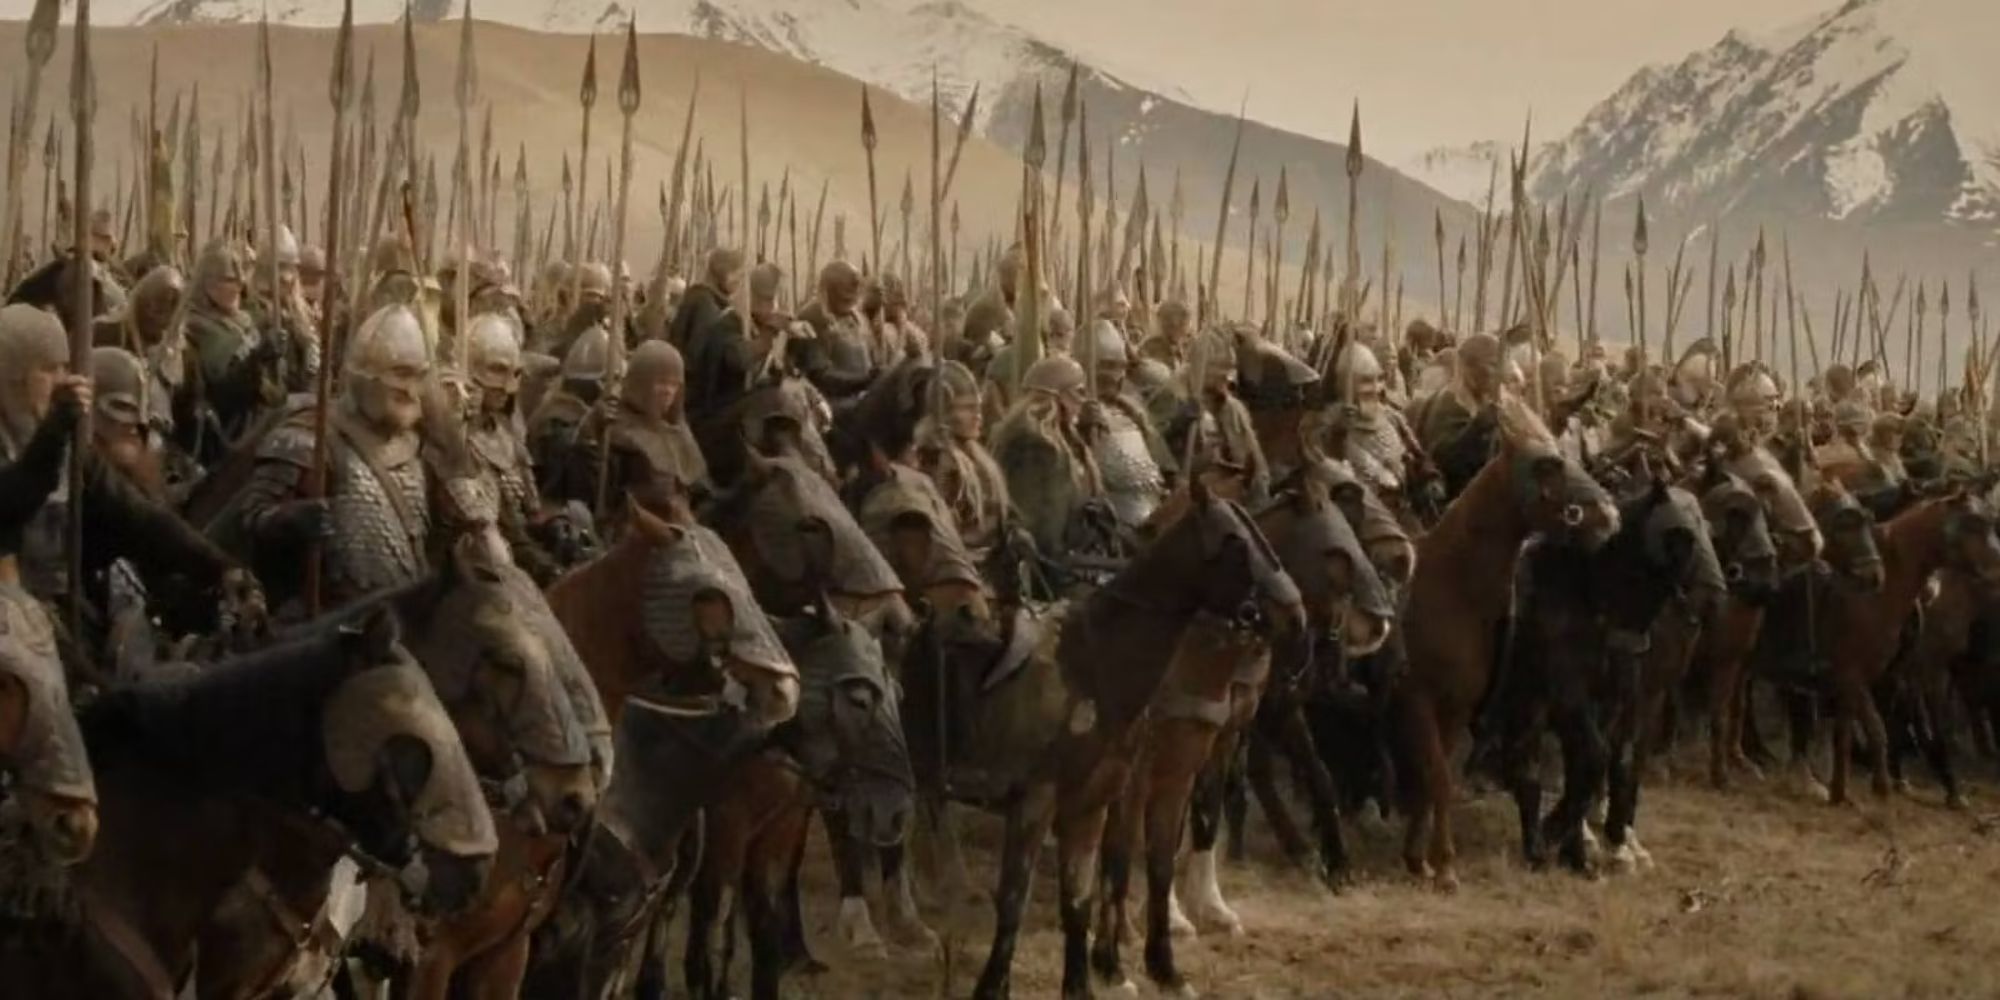 Riders of Rohan assembling in a line with spears in The Lord of the Rings.